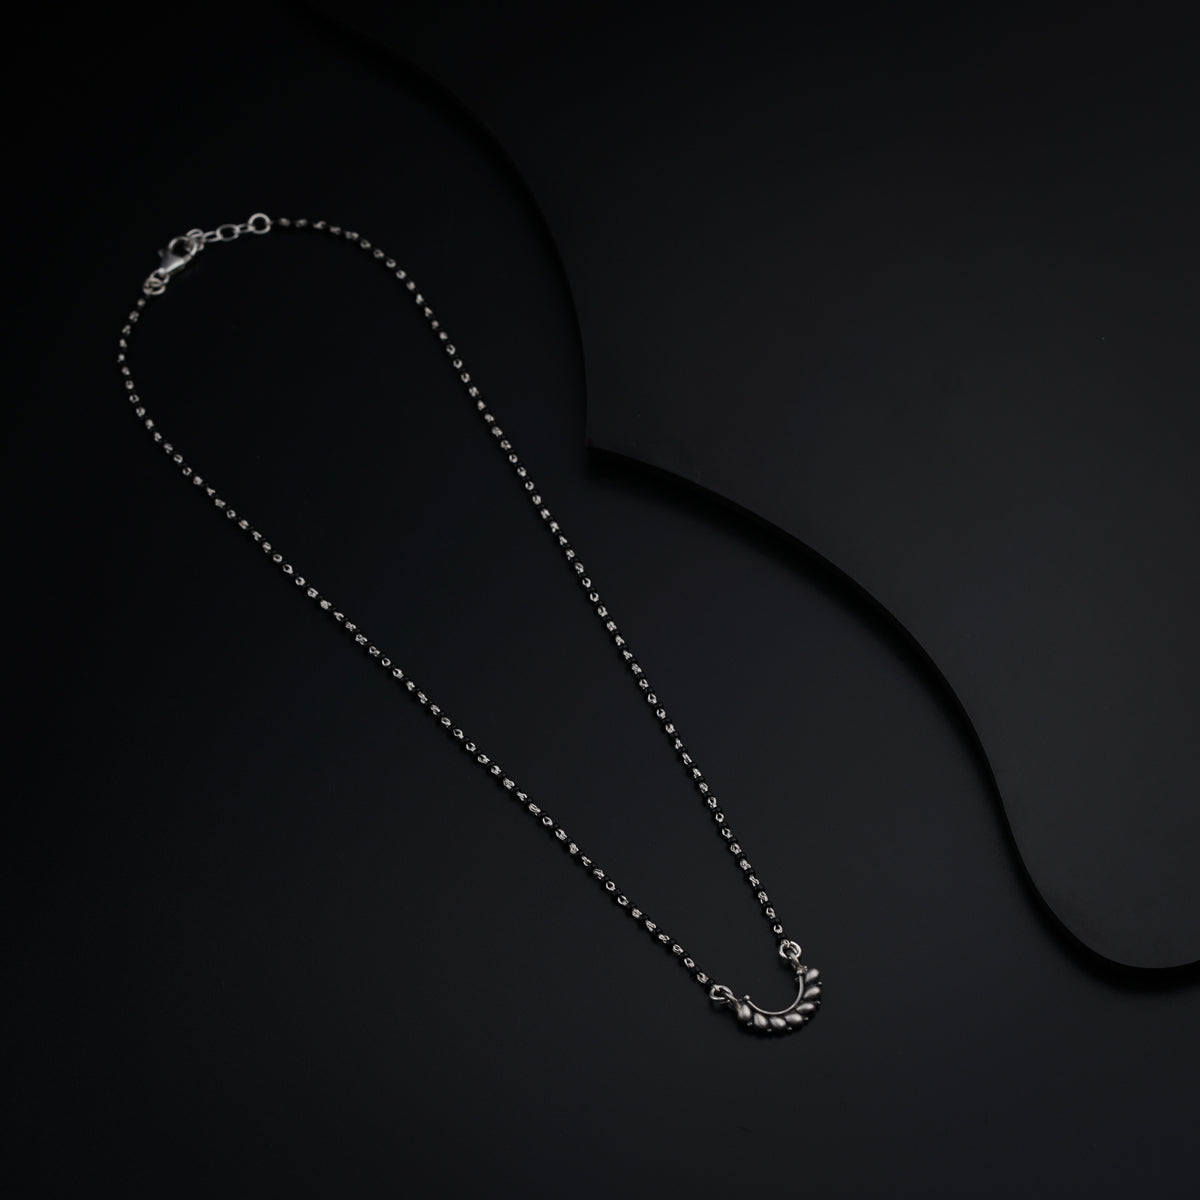 a black background with a silver necklace on it